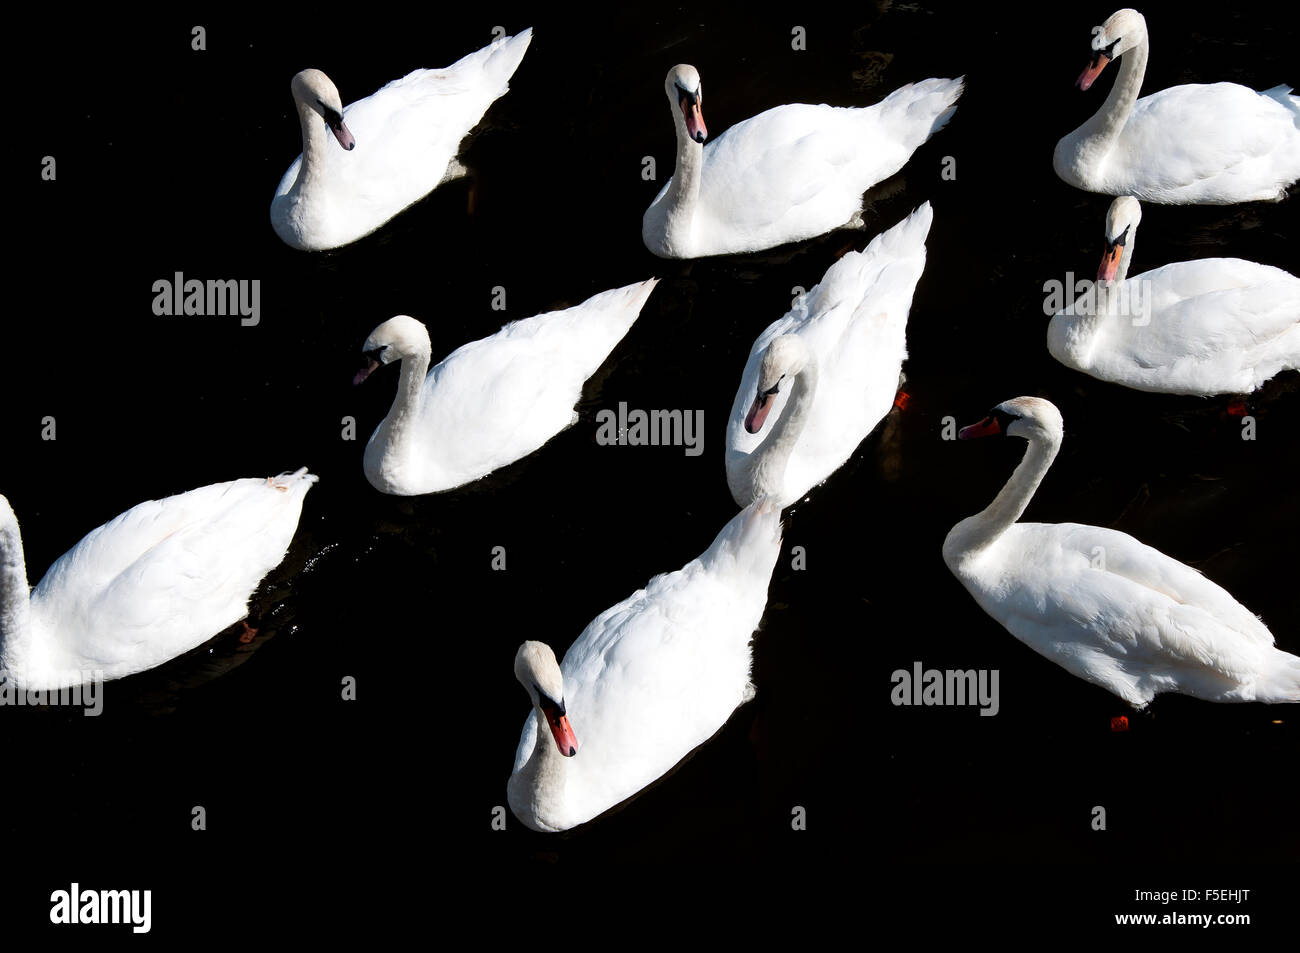 Overhead view of a bevy of Swans on the River Avon, Stratford, UK Stock Photo